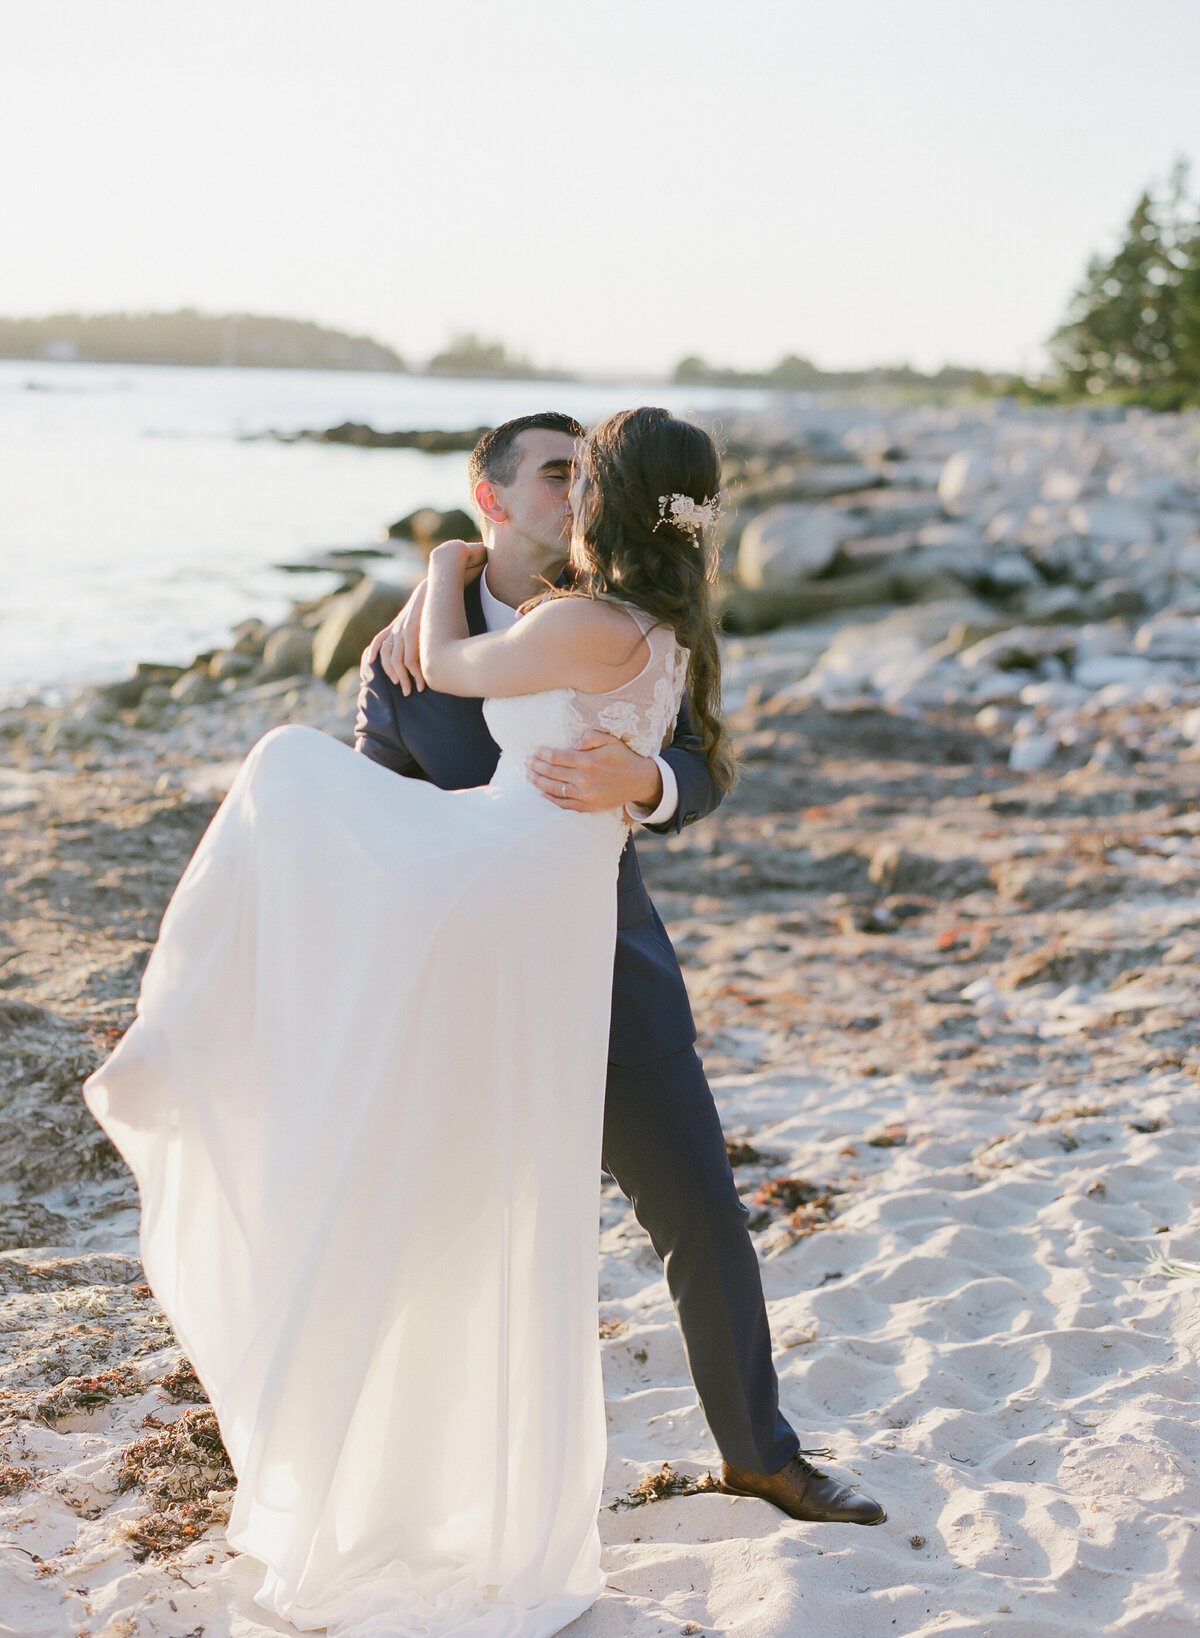 Jacqueline Anne Photography - Halifax Wedding Photographer - Jaclyn and Morgan-92